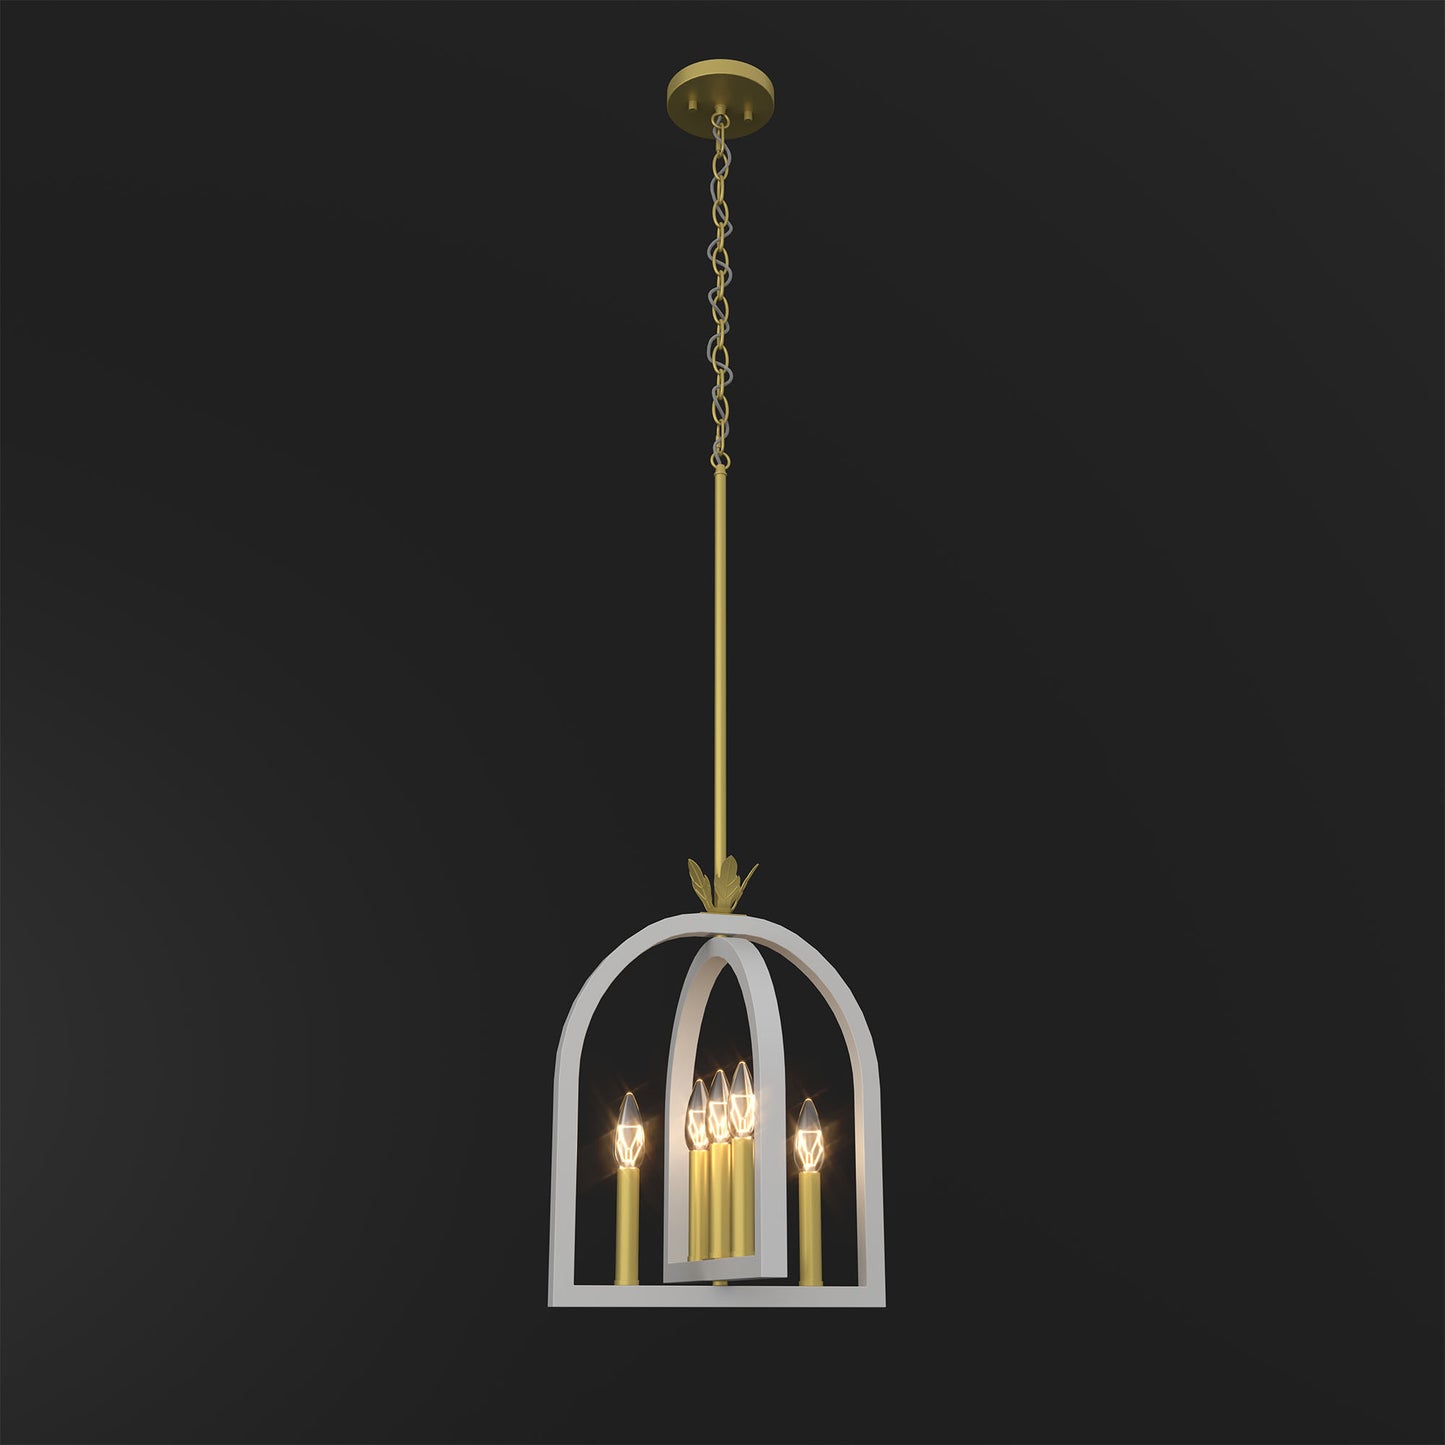 5 light empire lantern chandelier (7) by ACROMA